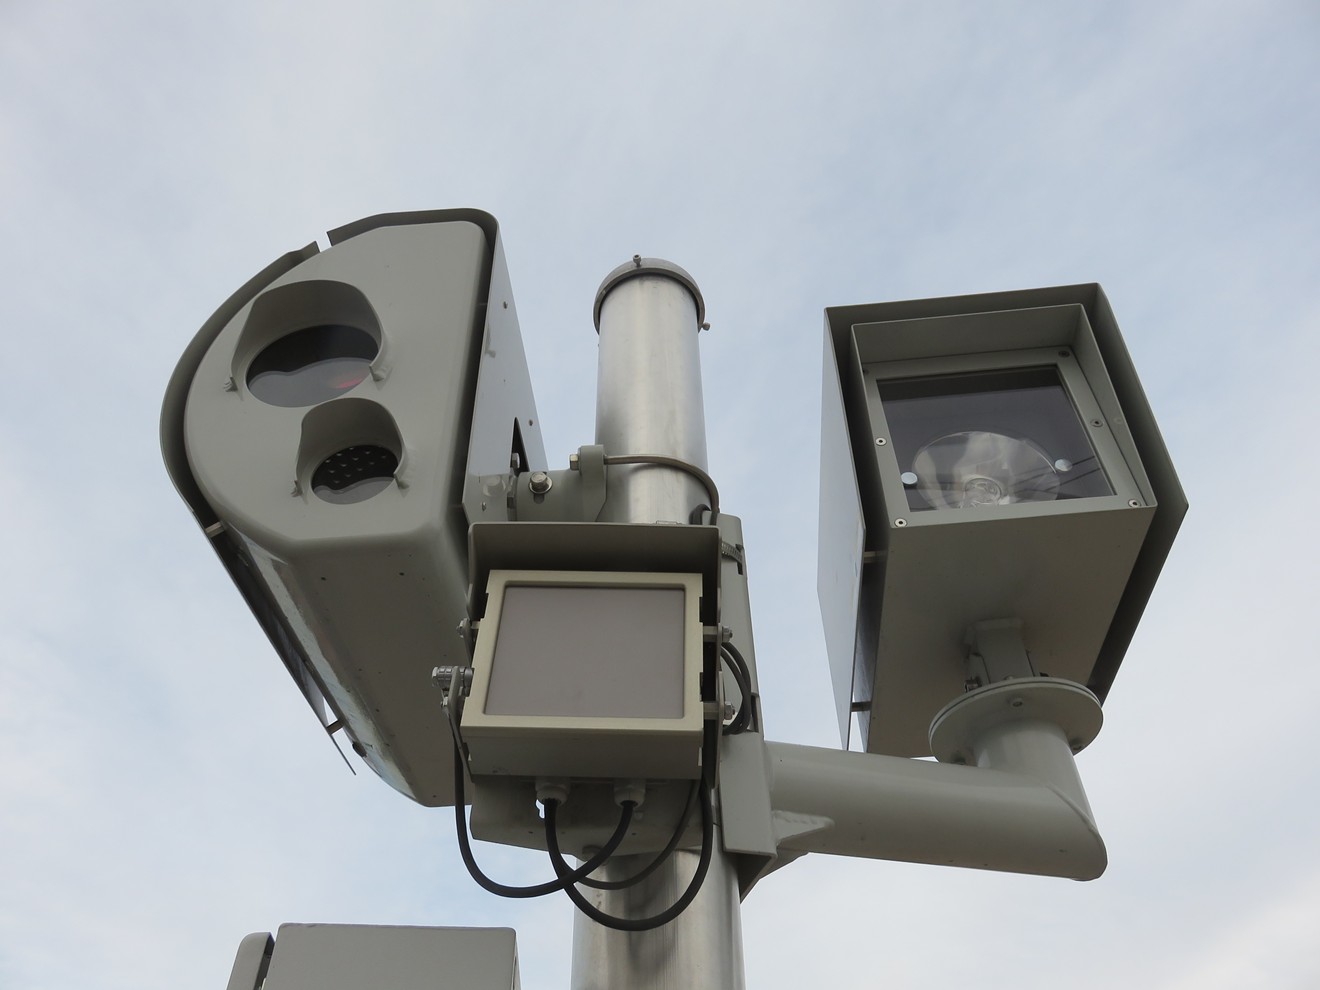 A speed/red-light camera in Scottsdale.